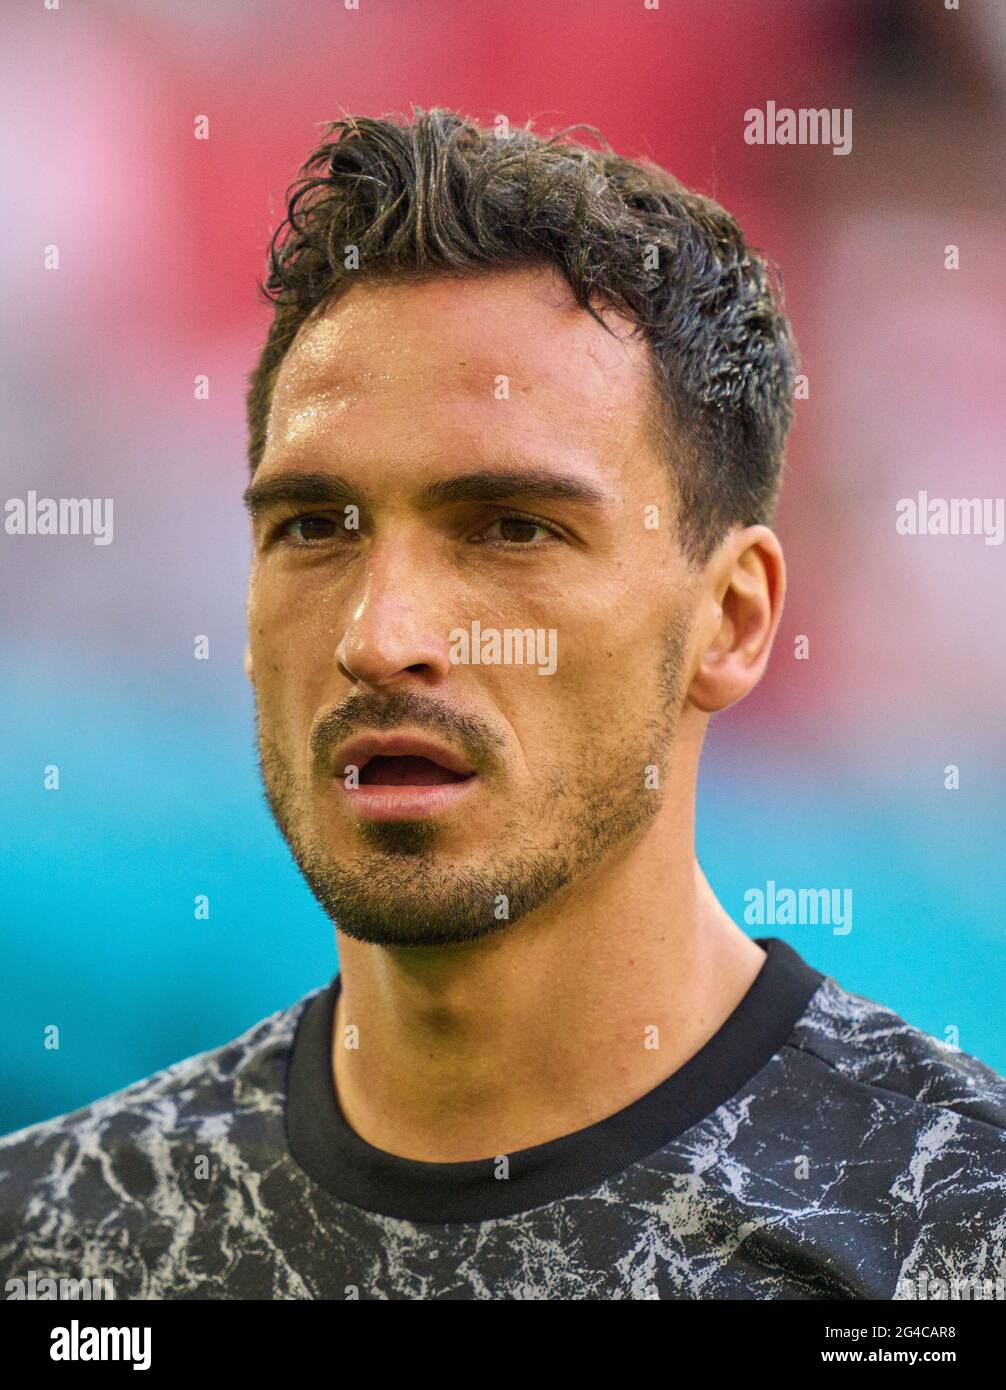 Munich, Germany. 19th June, 2021. Mats Hummels, DFB 5  half-size, portrait, one person, single, Aktion, Einzelbild, angeschnittenes Einzelmotiv, Halbfigur, halbe Figur,  in the Group F match PORTUGAL - GERMANY 2-4  at the football UEFA European Championships 2020 in Season 2020/2021 on June 19, 2021  in Munich, Germany. © Peter Schatz / Alamy Live News Stock Photo